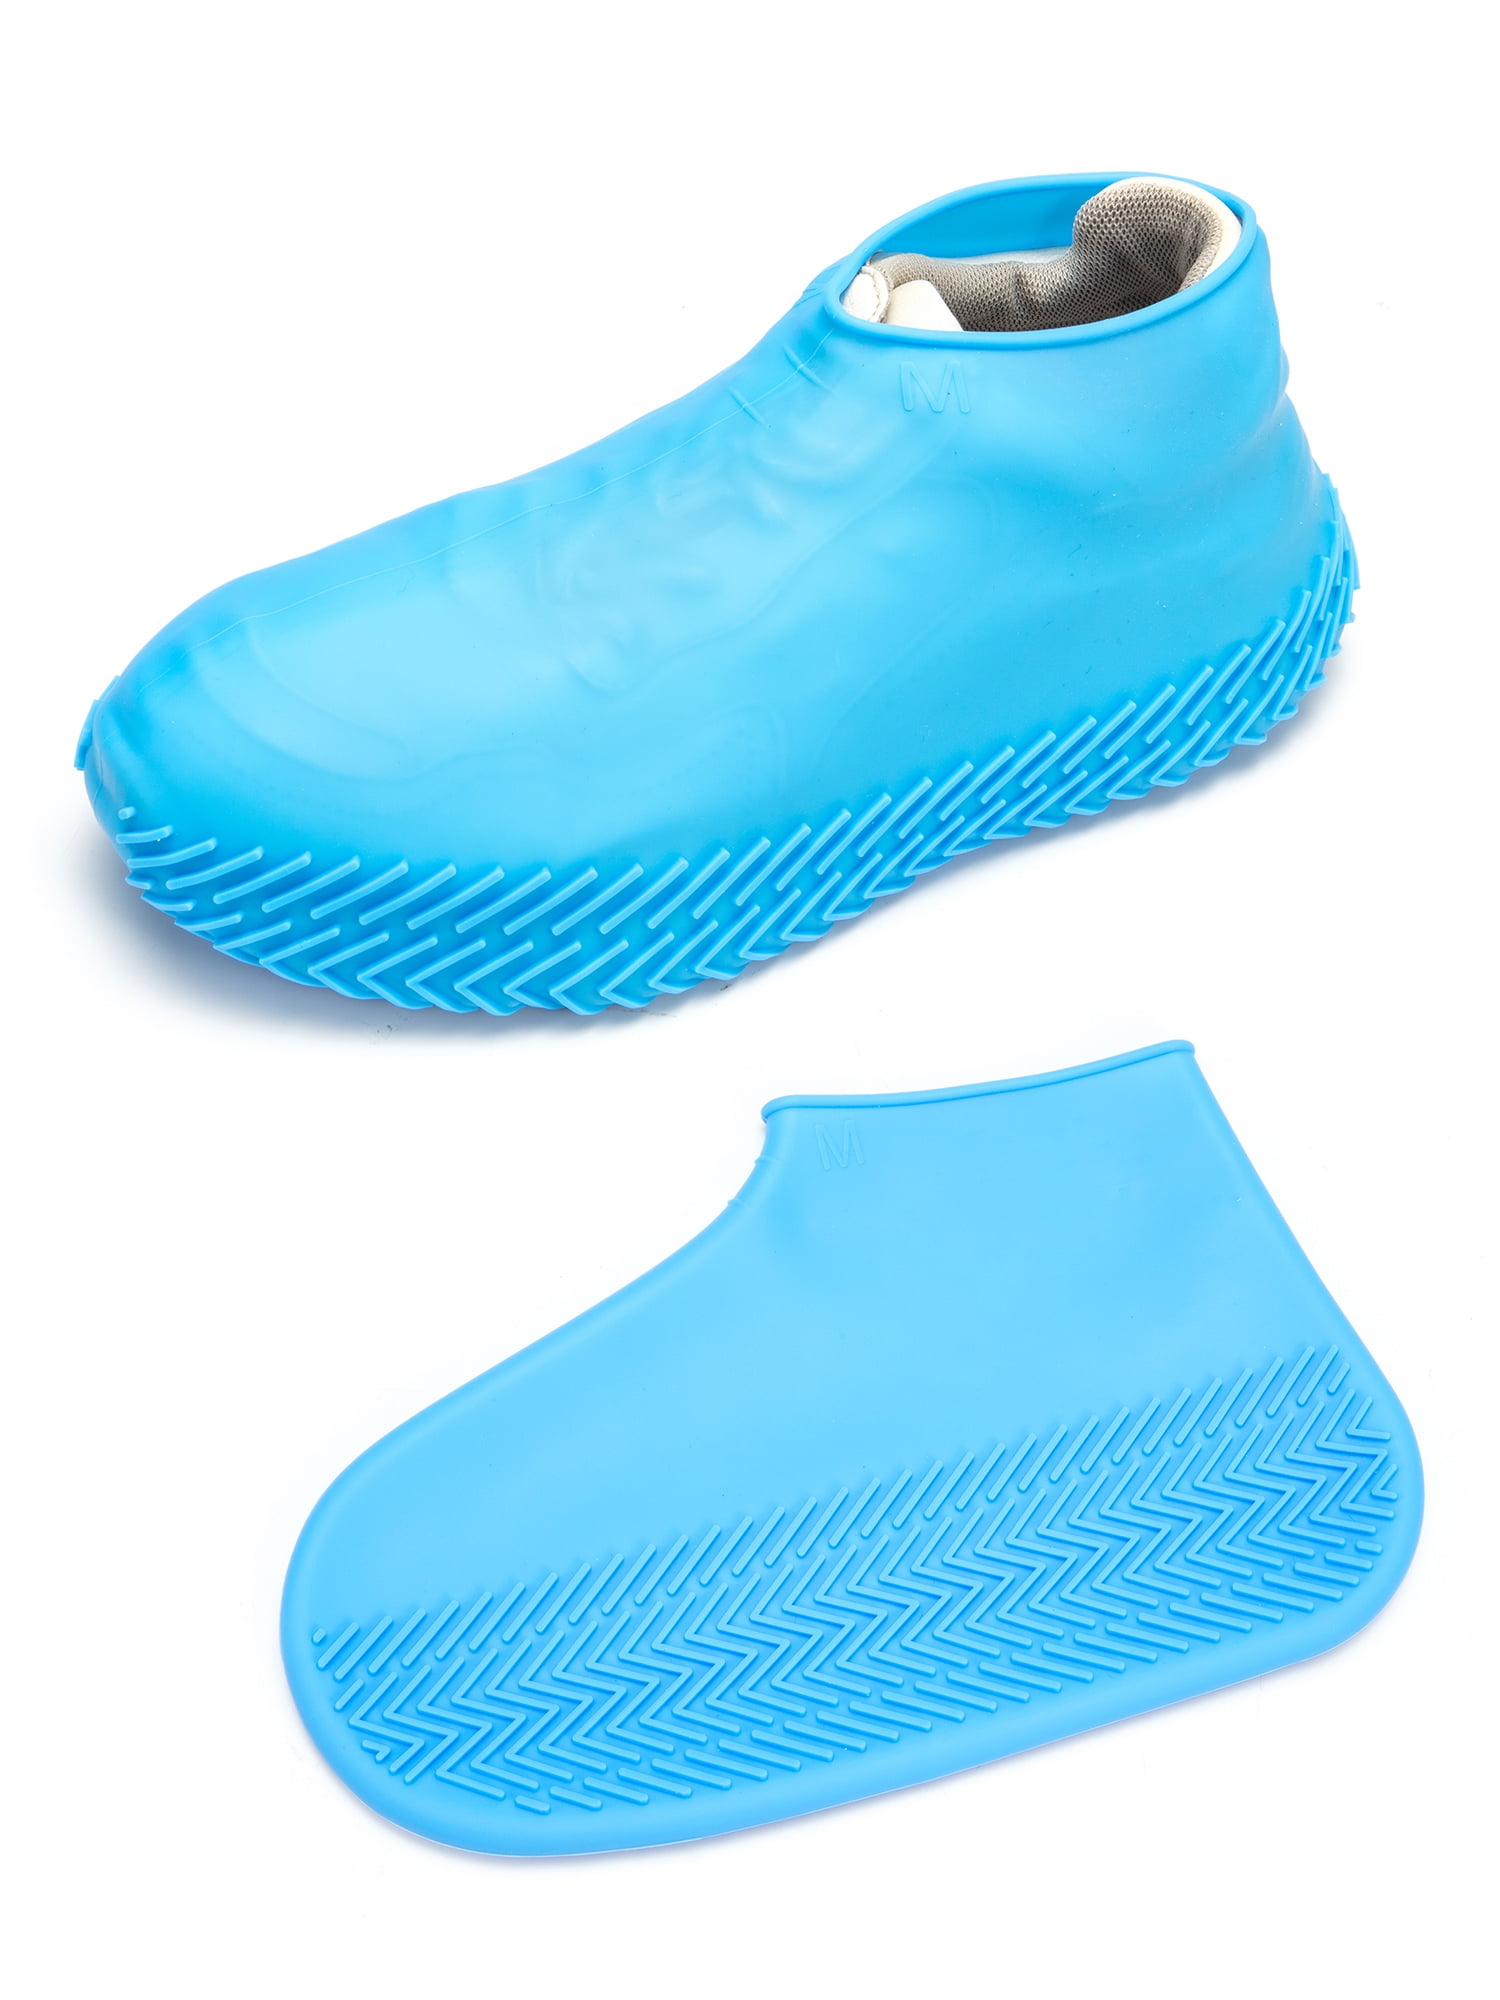 Reusable Shoe Covers Pair of Waterproof Silicone Rain Shoe Protectors Overshoes 